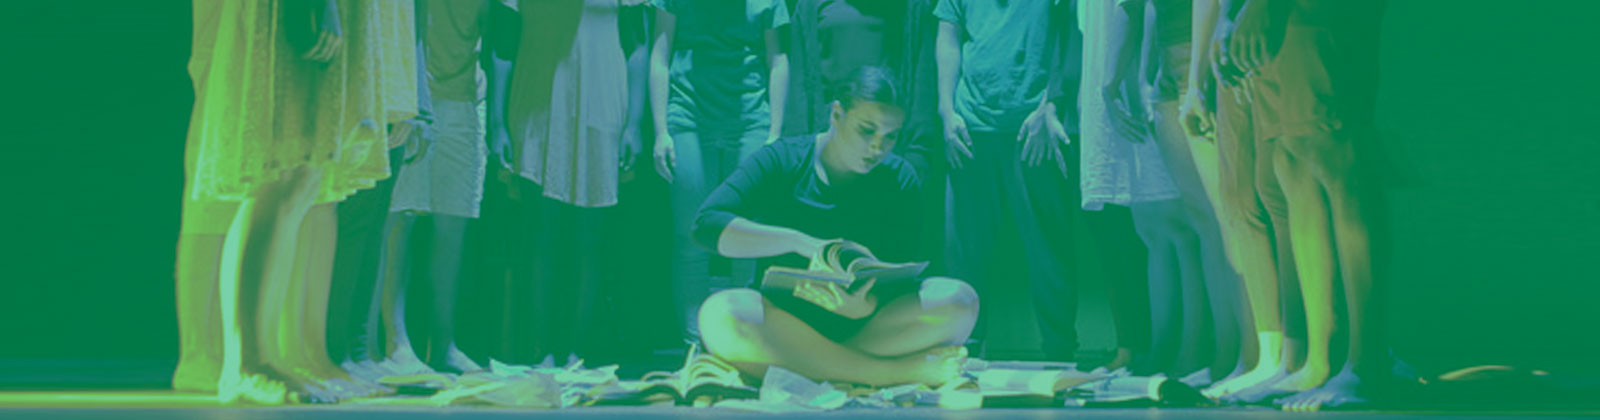 Dance Performance Girl sitting with book with group surrounding her